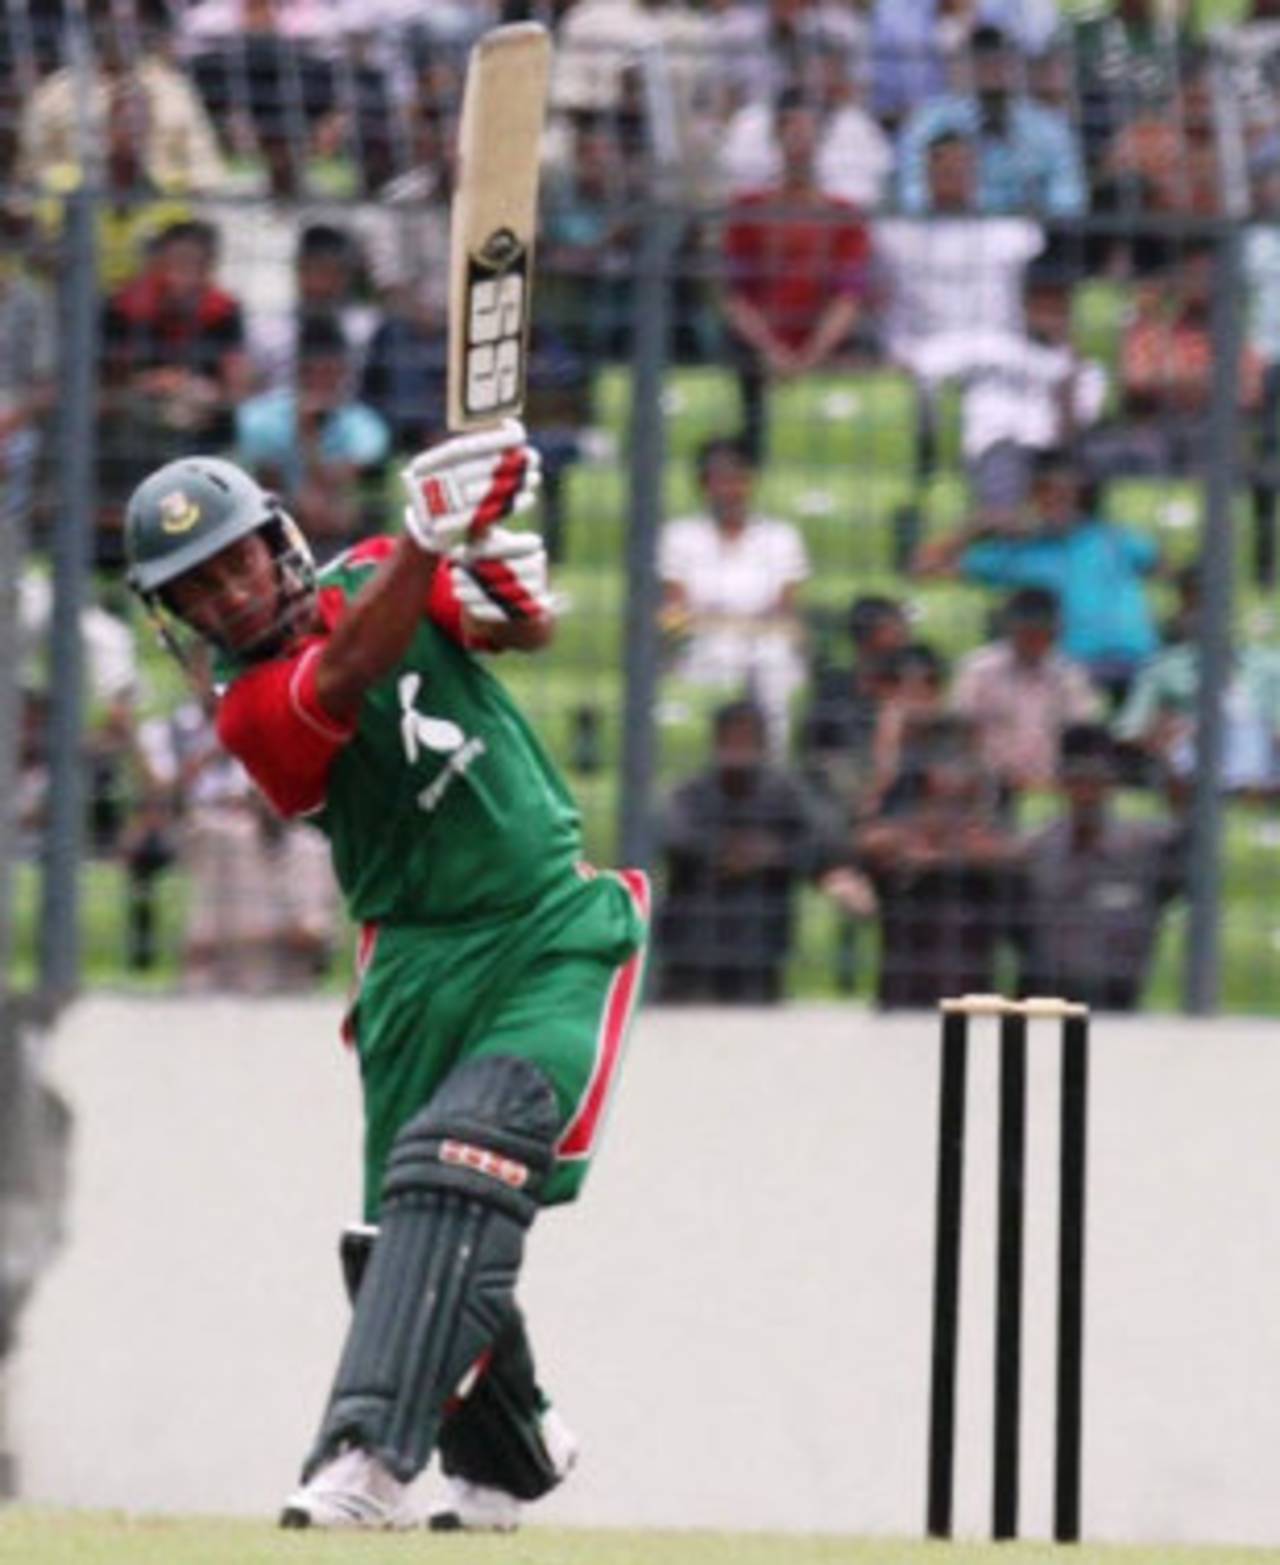 Stuart Law on Mohammad Ashraful: "He needs to go away and think about ways to score runs."&nbsp;&nbsp;&bull;&nbsp;&nbsp;BCB